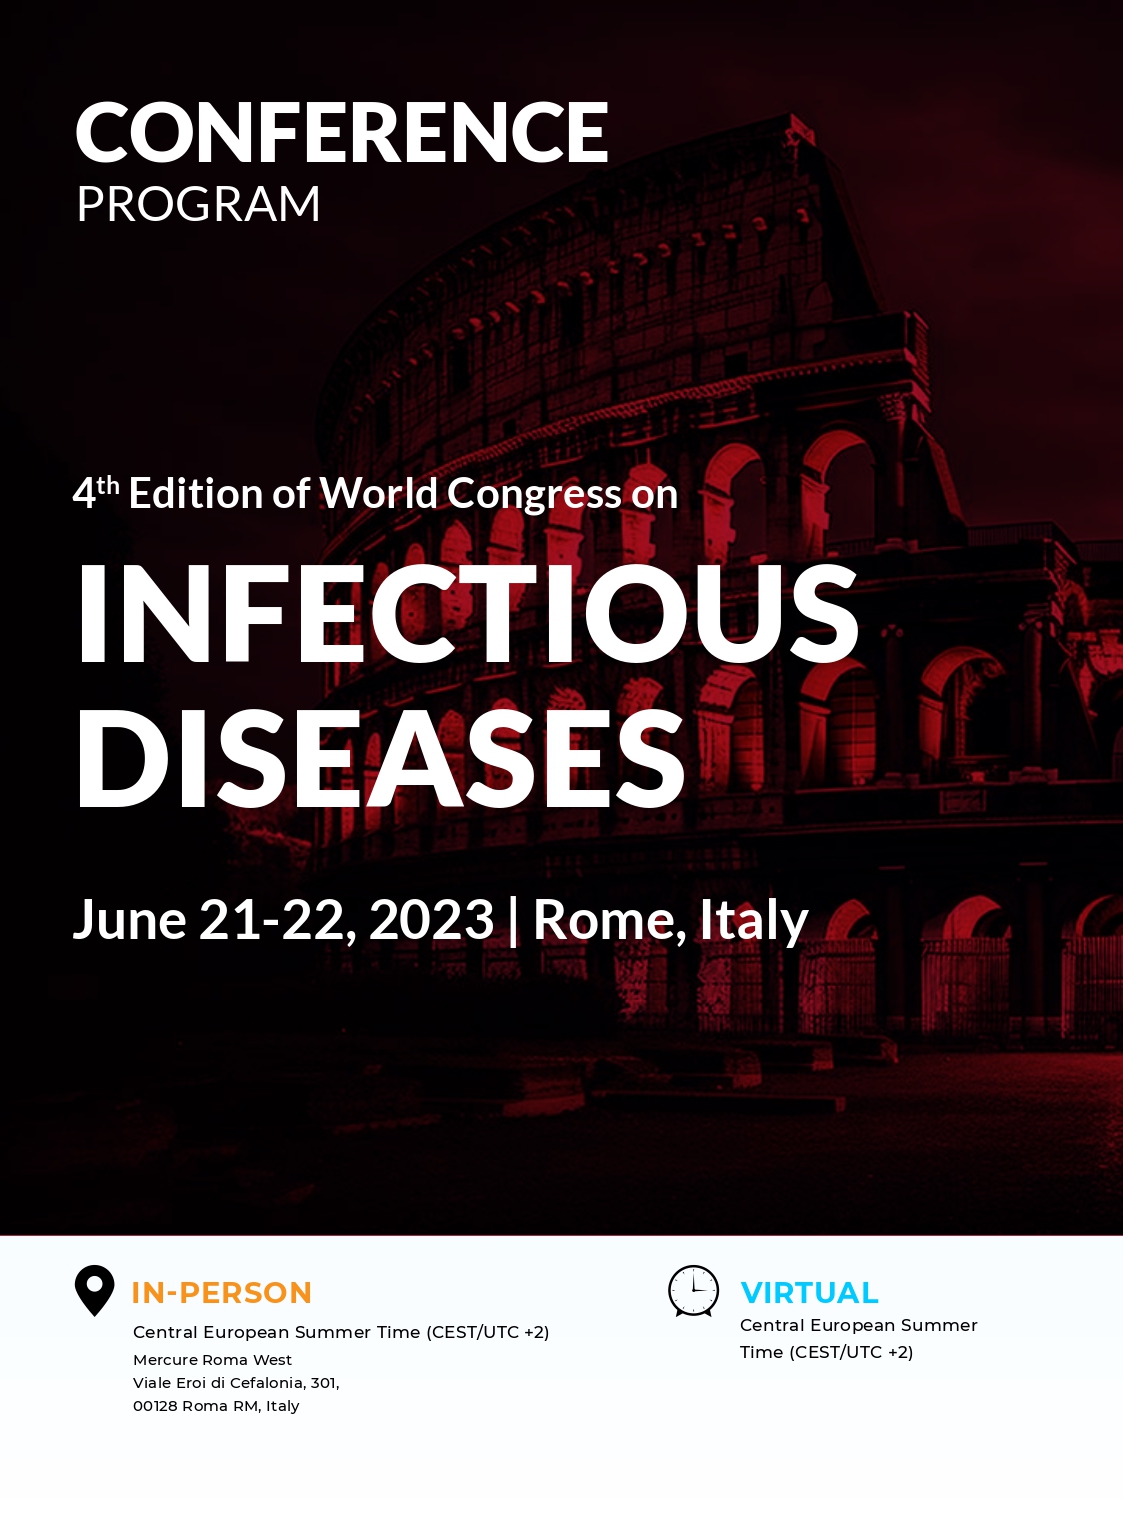 World Congress on Infectious Diseases | Rome, Italy Program